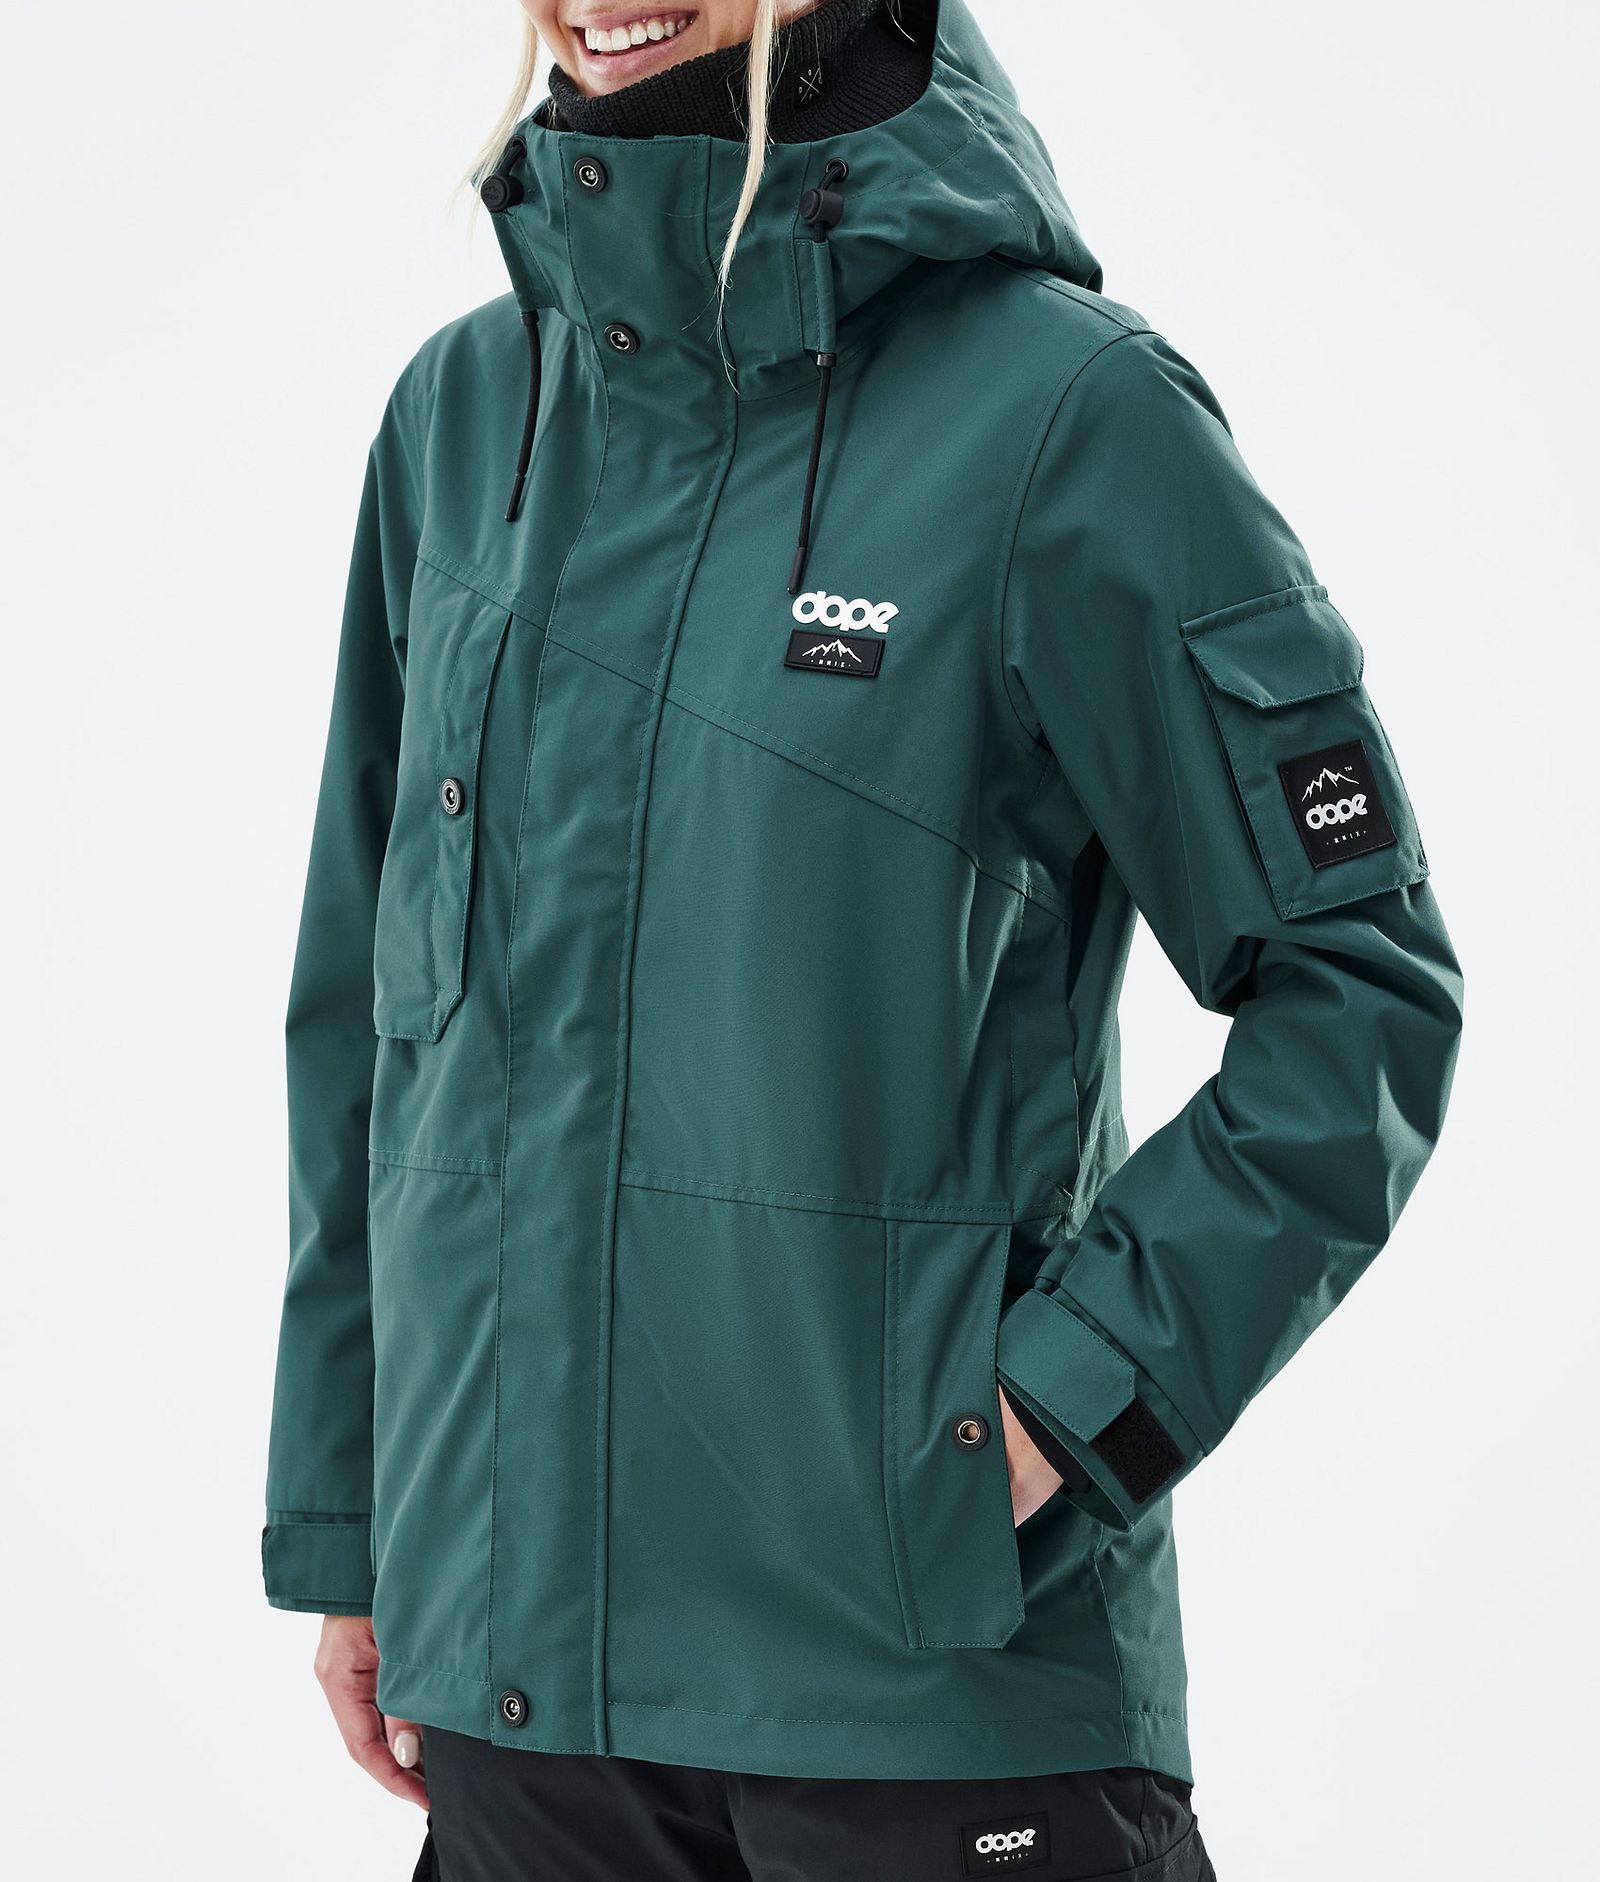 Dope Adept W Chaqueta Esquí Mujer Bottle Green